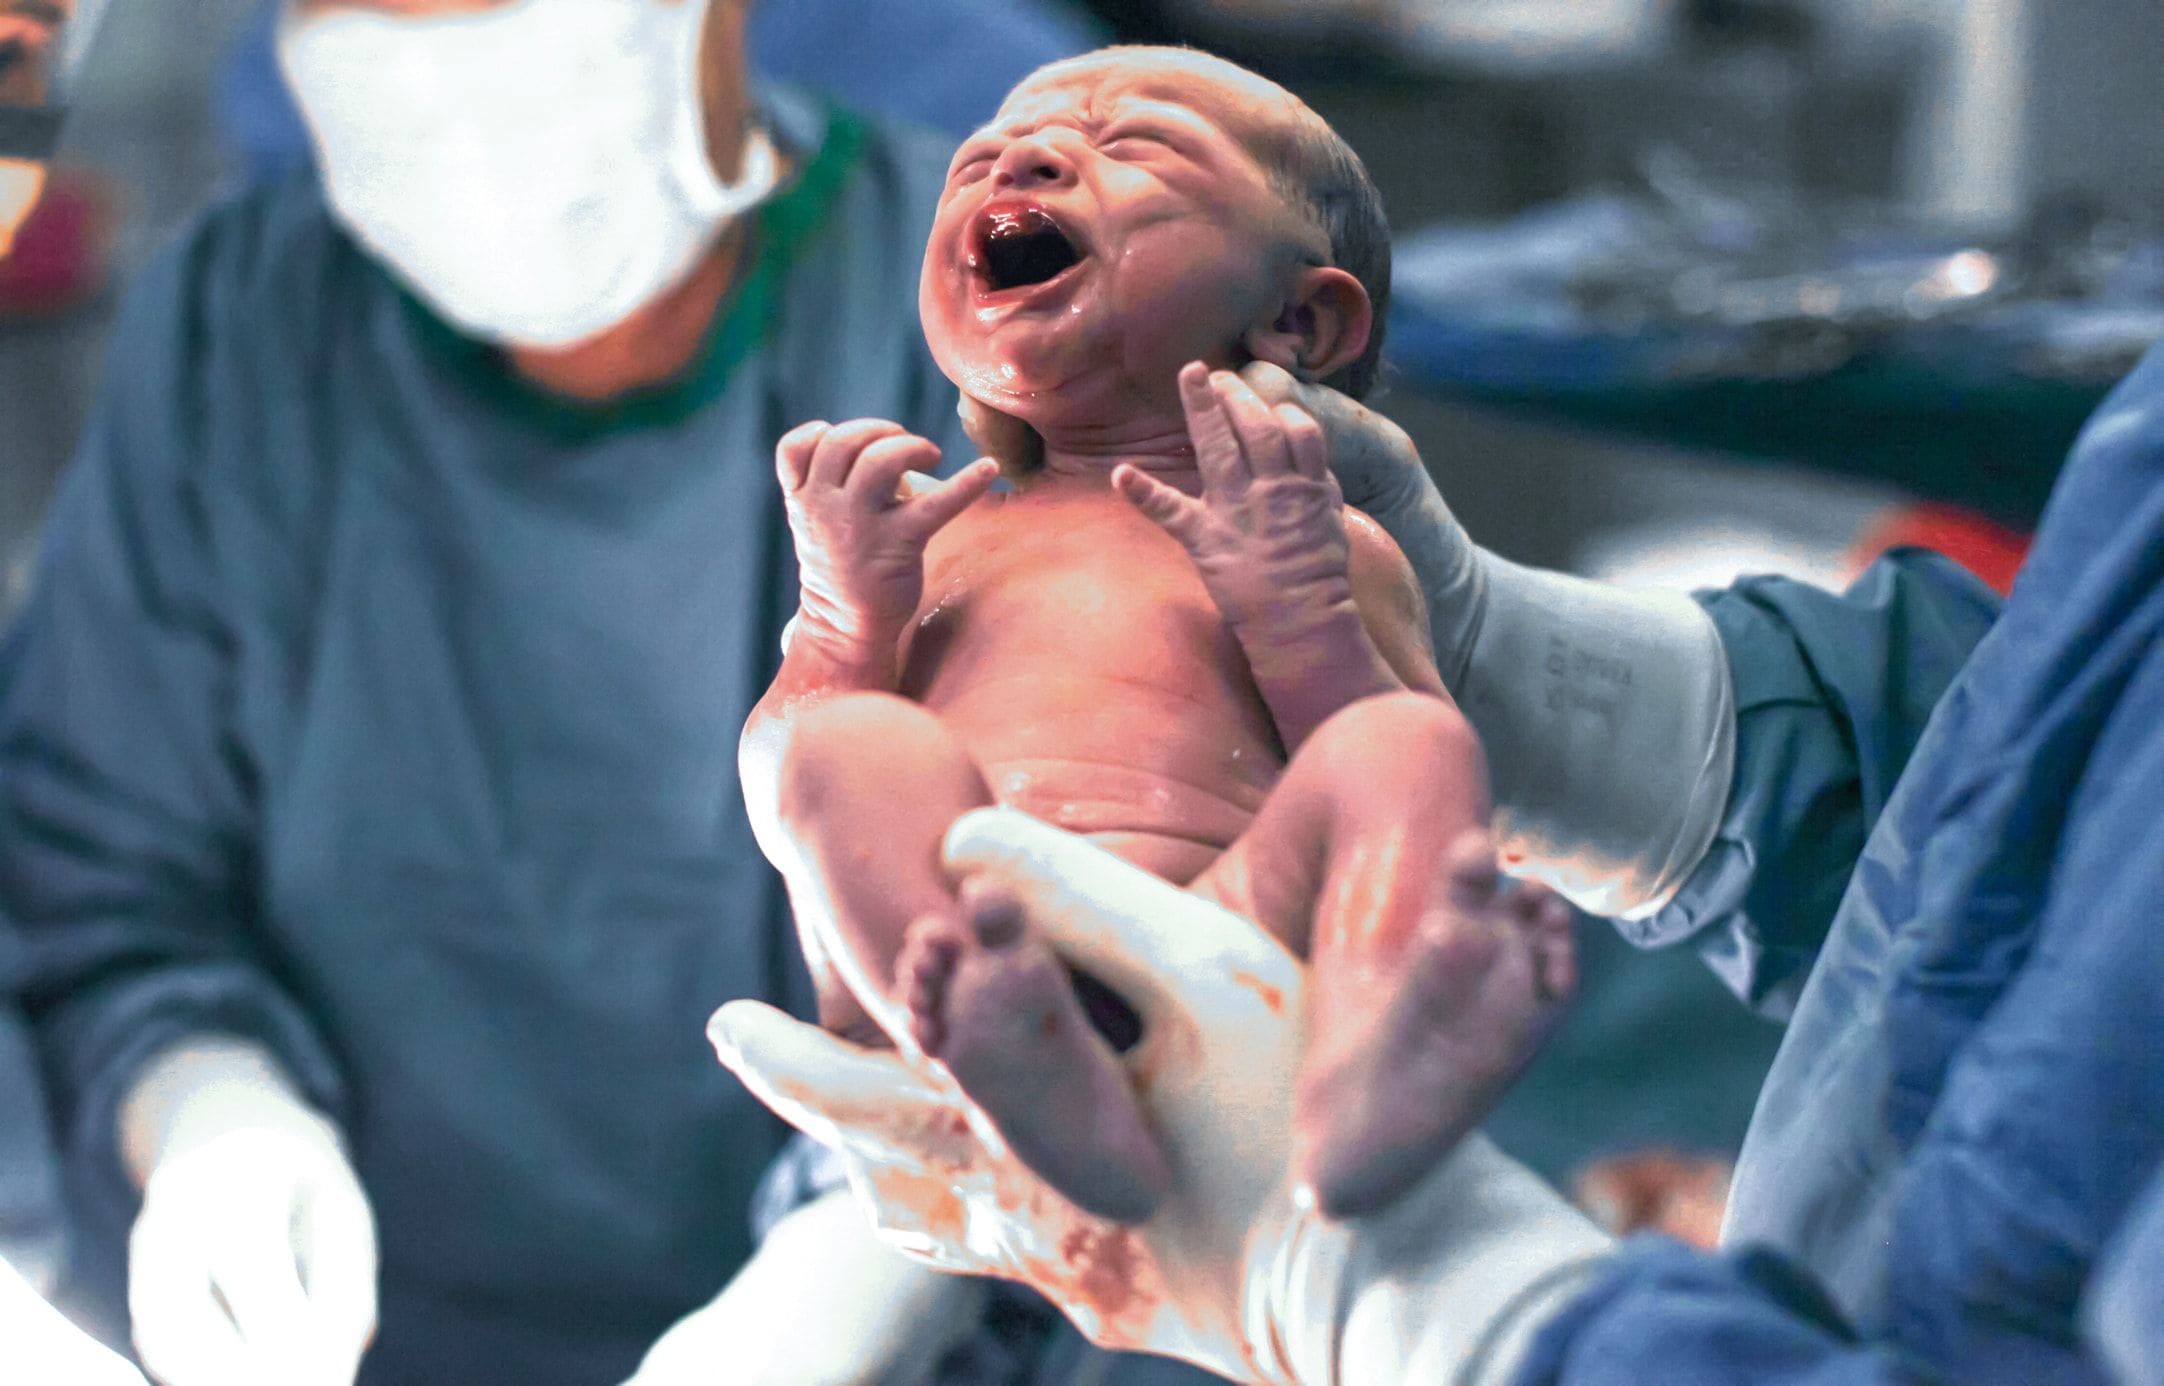 14 baby birth videos that (really) prepare you for the big day